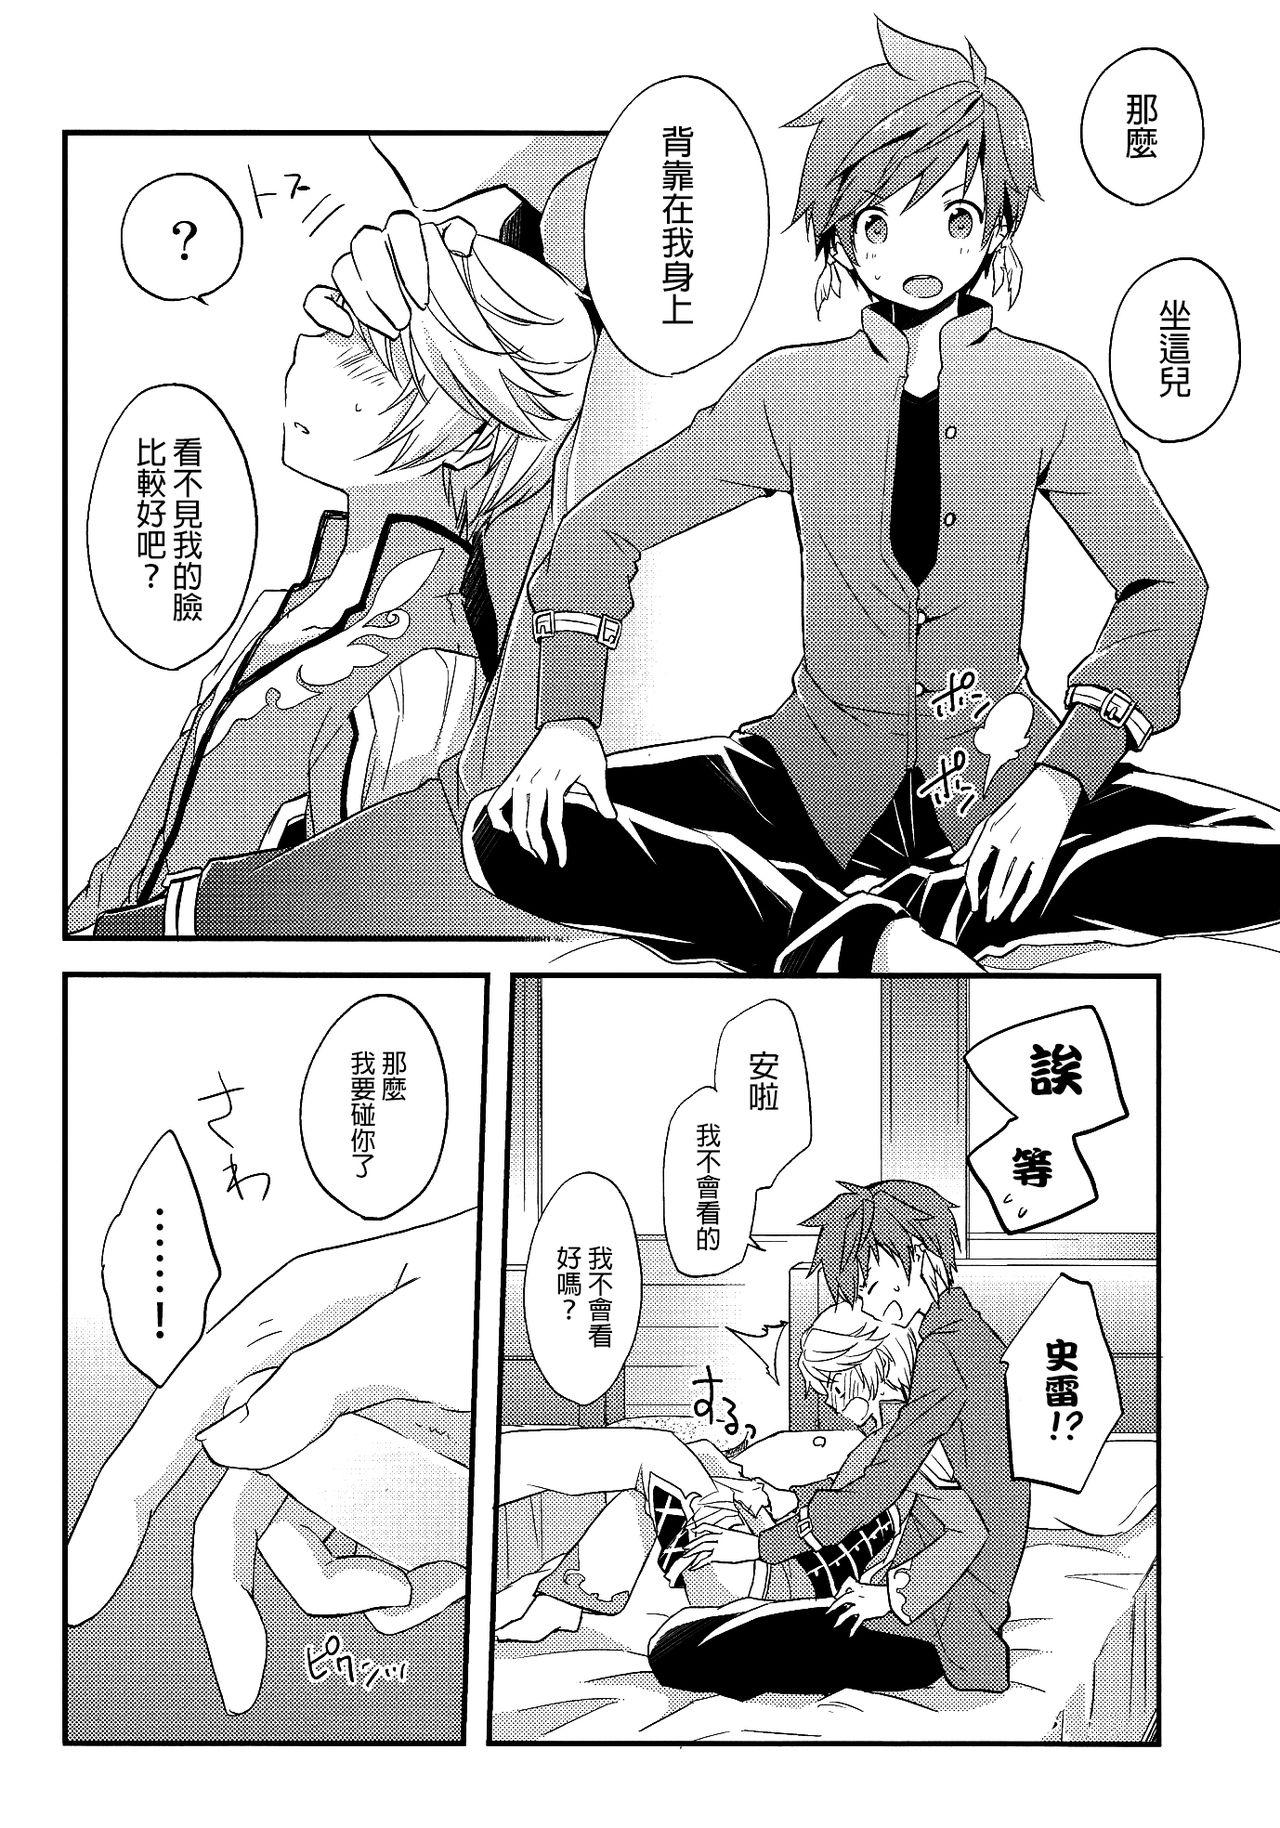 Wife Datte Dare mo Oshiete Kurenai | That's because nobody taught me - Tales of zestiria Blowjob - Page 10